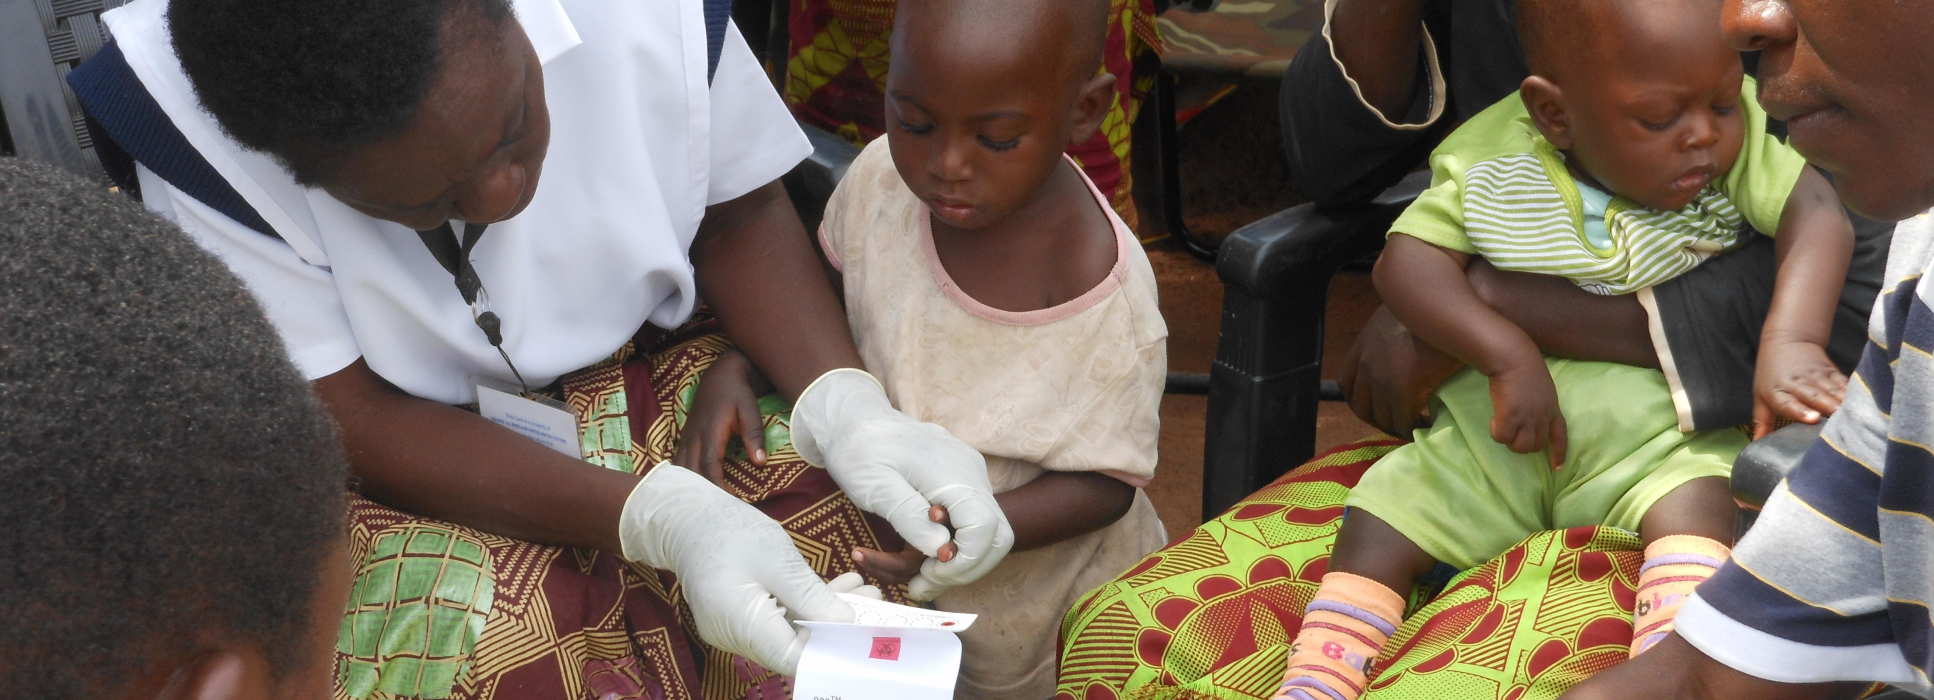 A child being tested for malaria